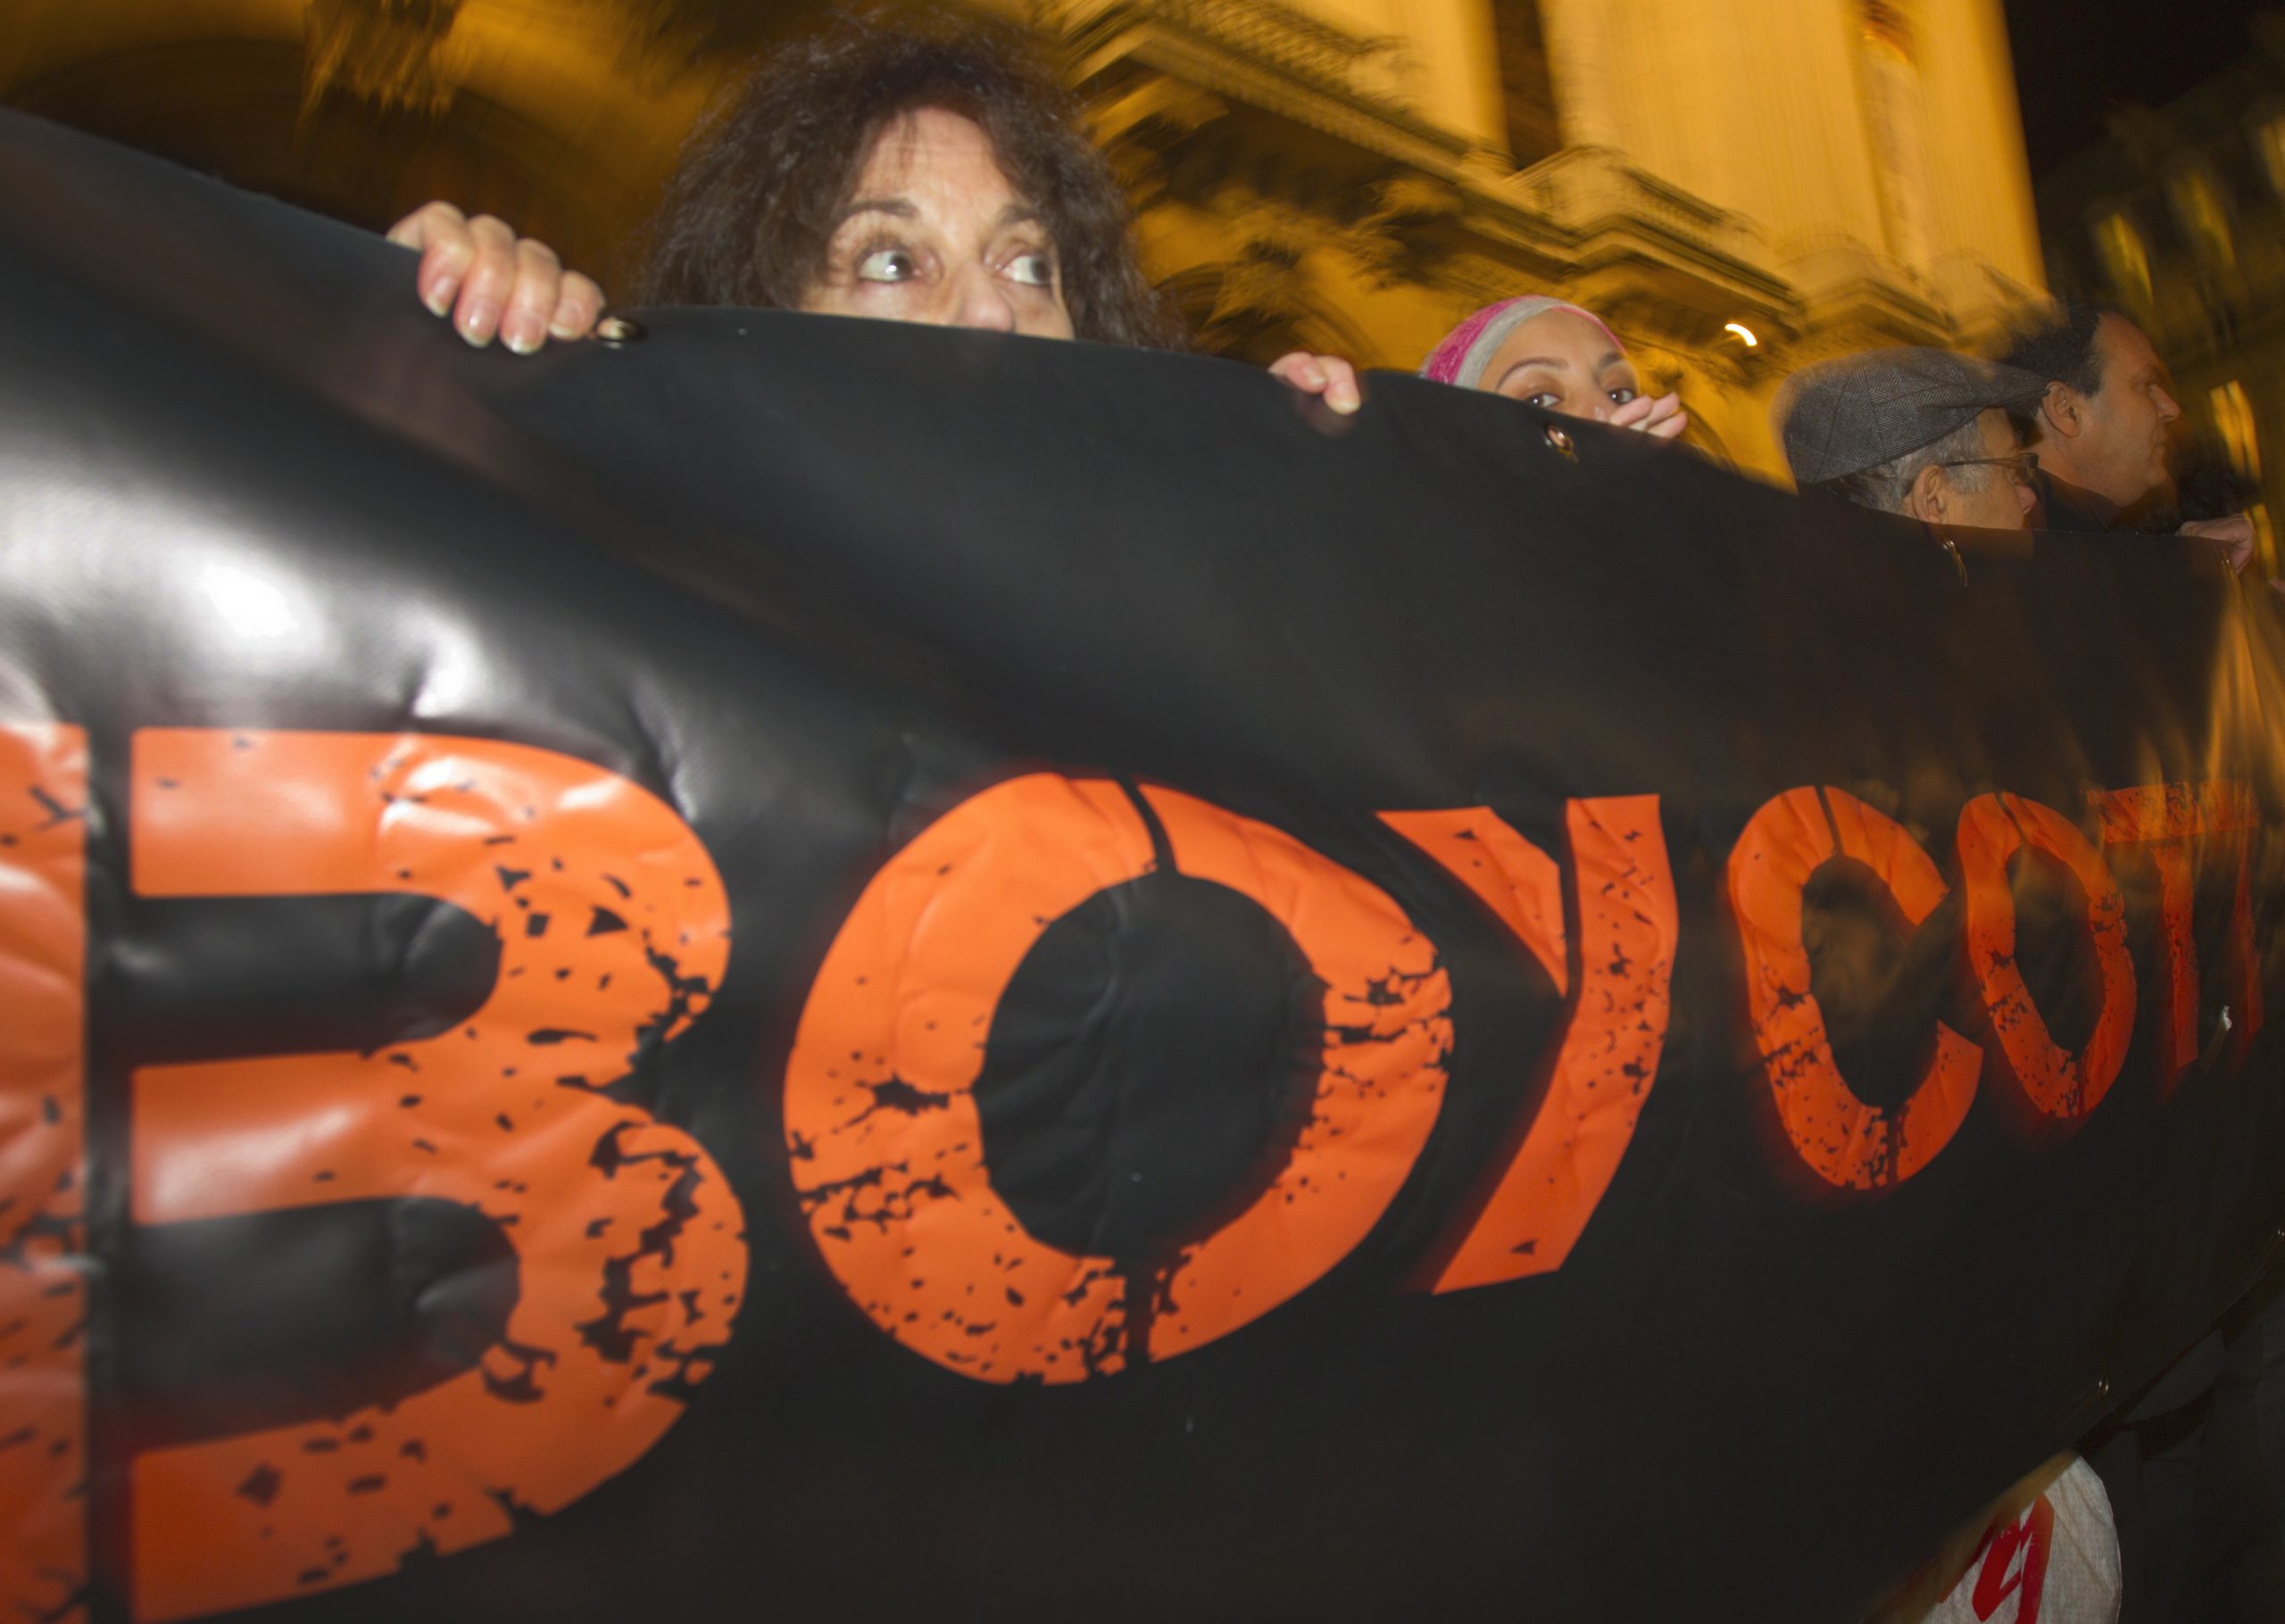 While U.S. Secretary of State Pompeo announced a new State Department position that the Boycott, Divestment and Sanctions movement is anti-Semitic—joining some 32 states and a host of other Western nations—BDS forces continue to score victories on college campuses.